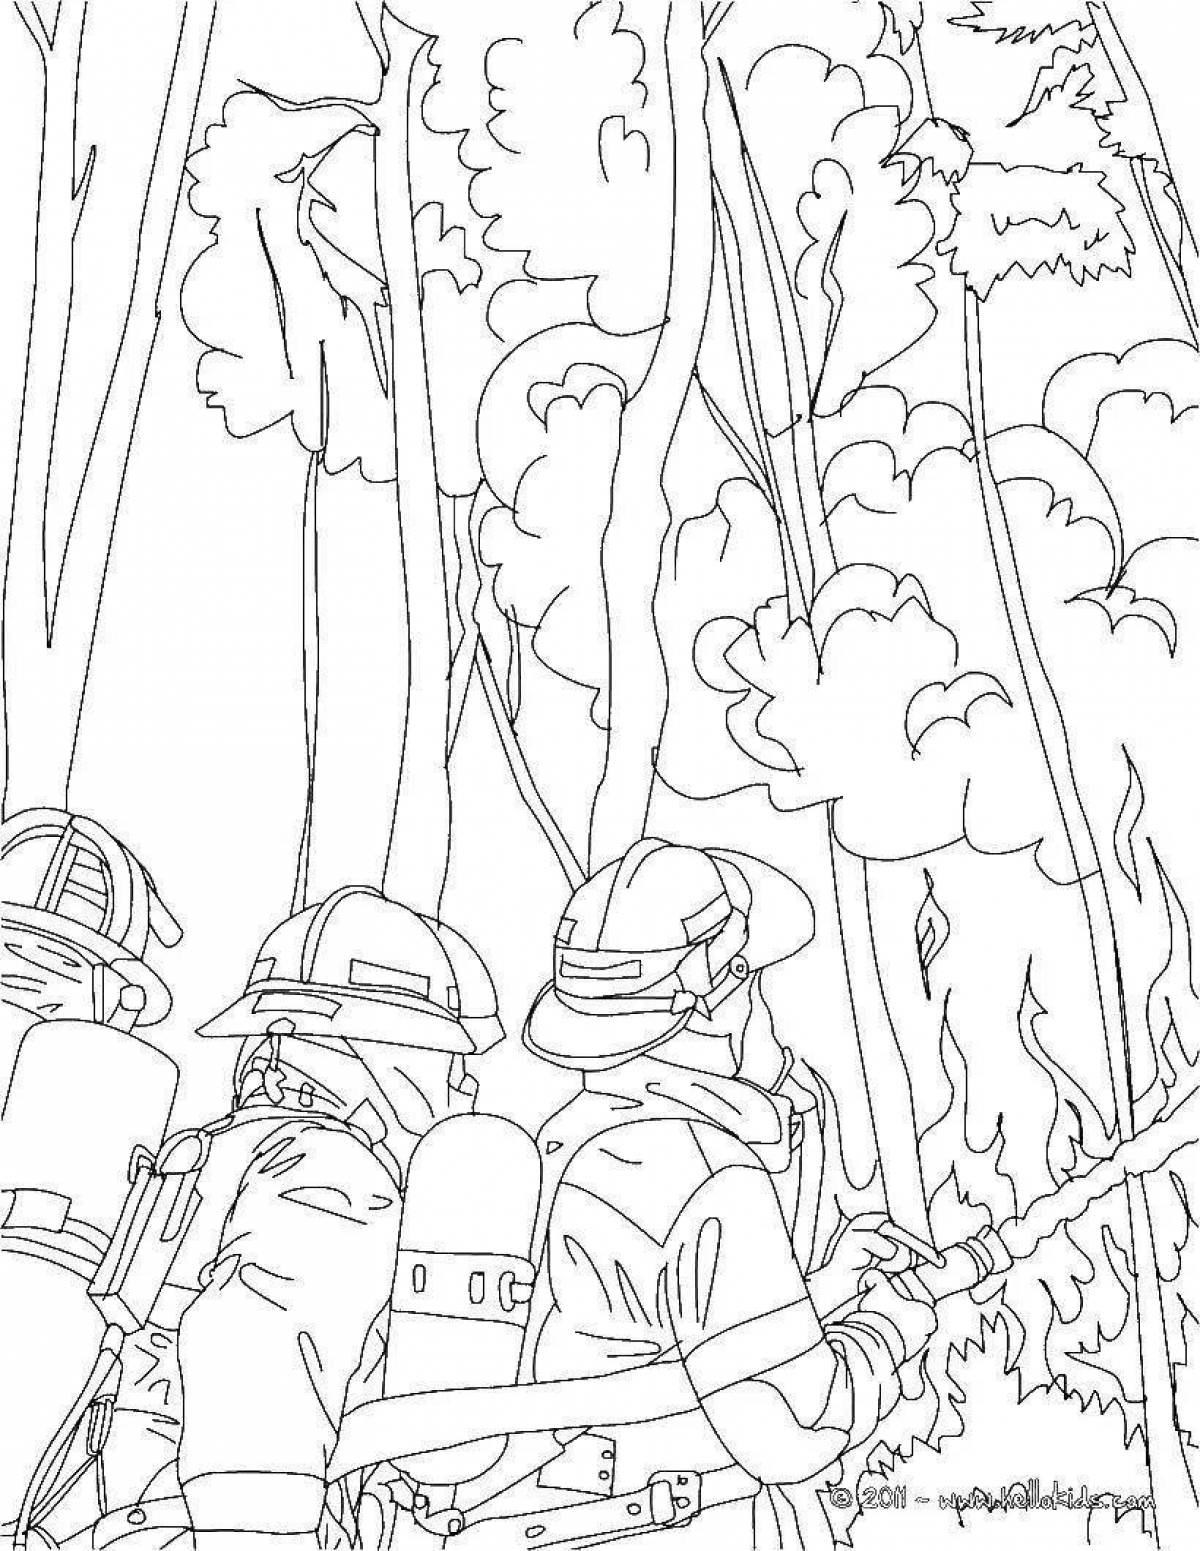 Attractive firefighting coloring book